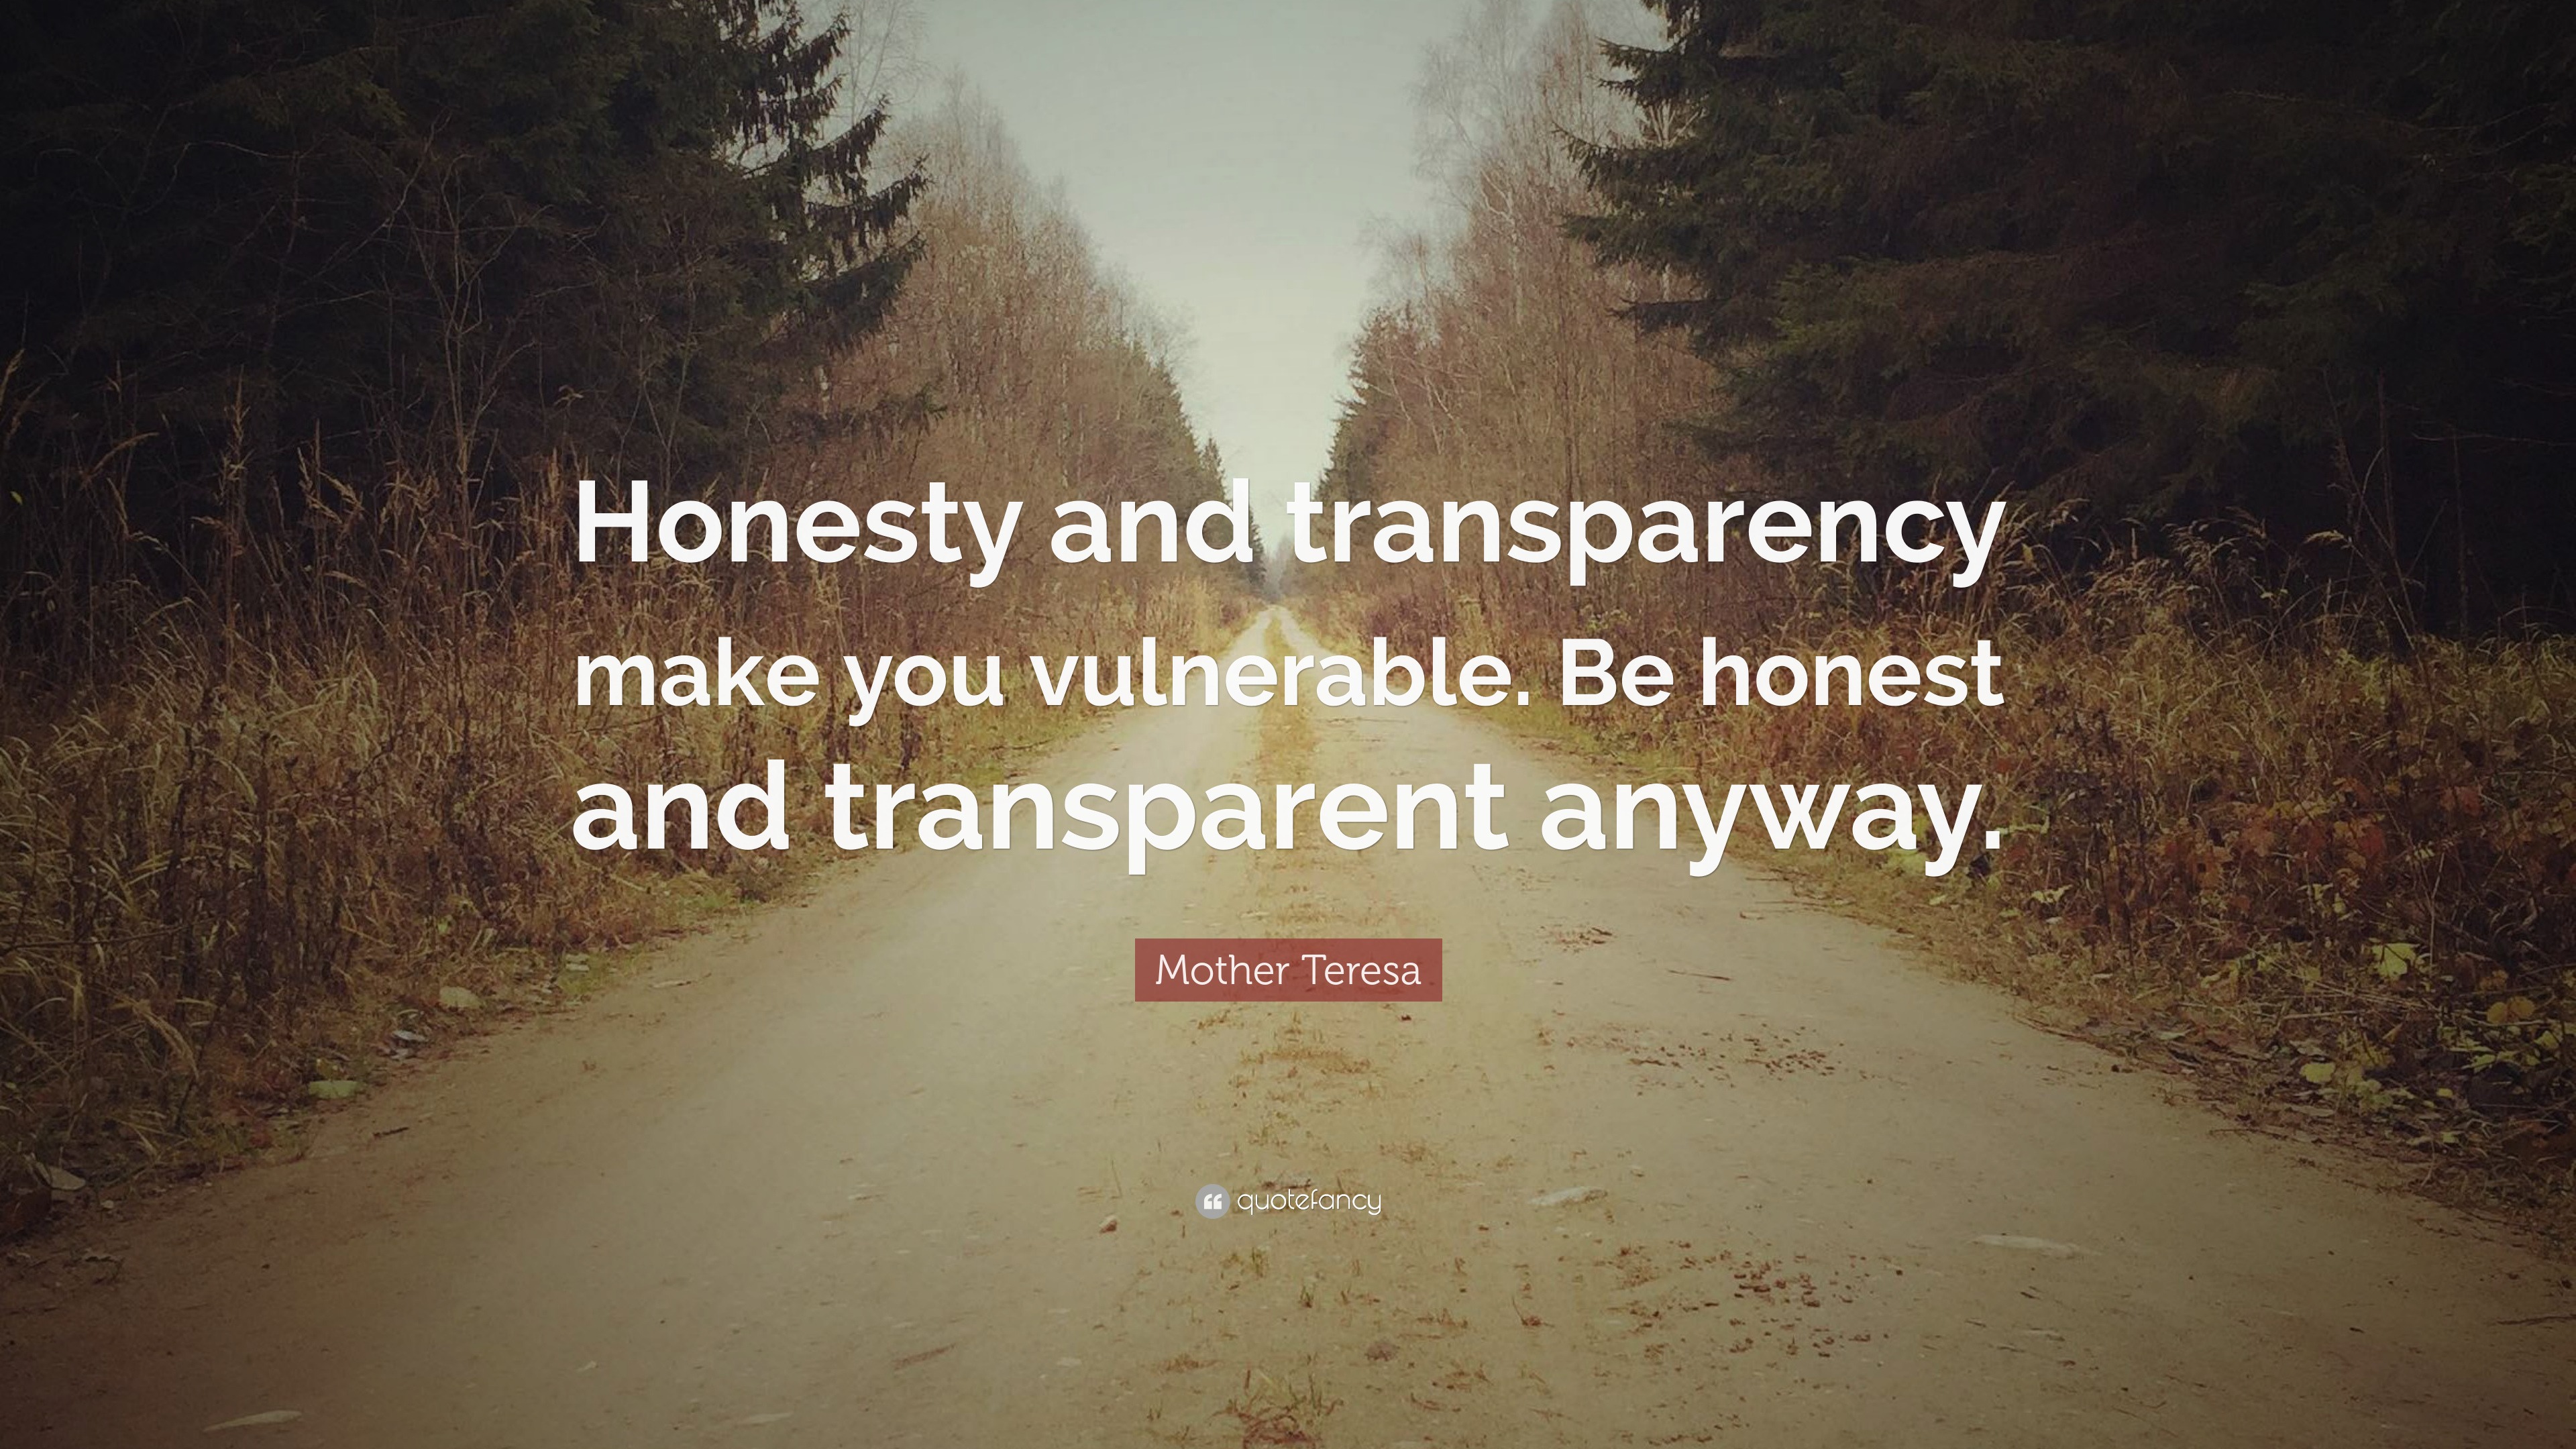 Mother Teresa Quote: “Honesty and transparency make you vulnerable. Be